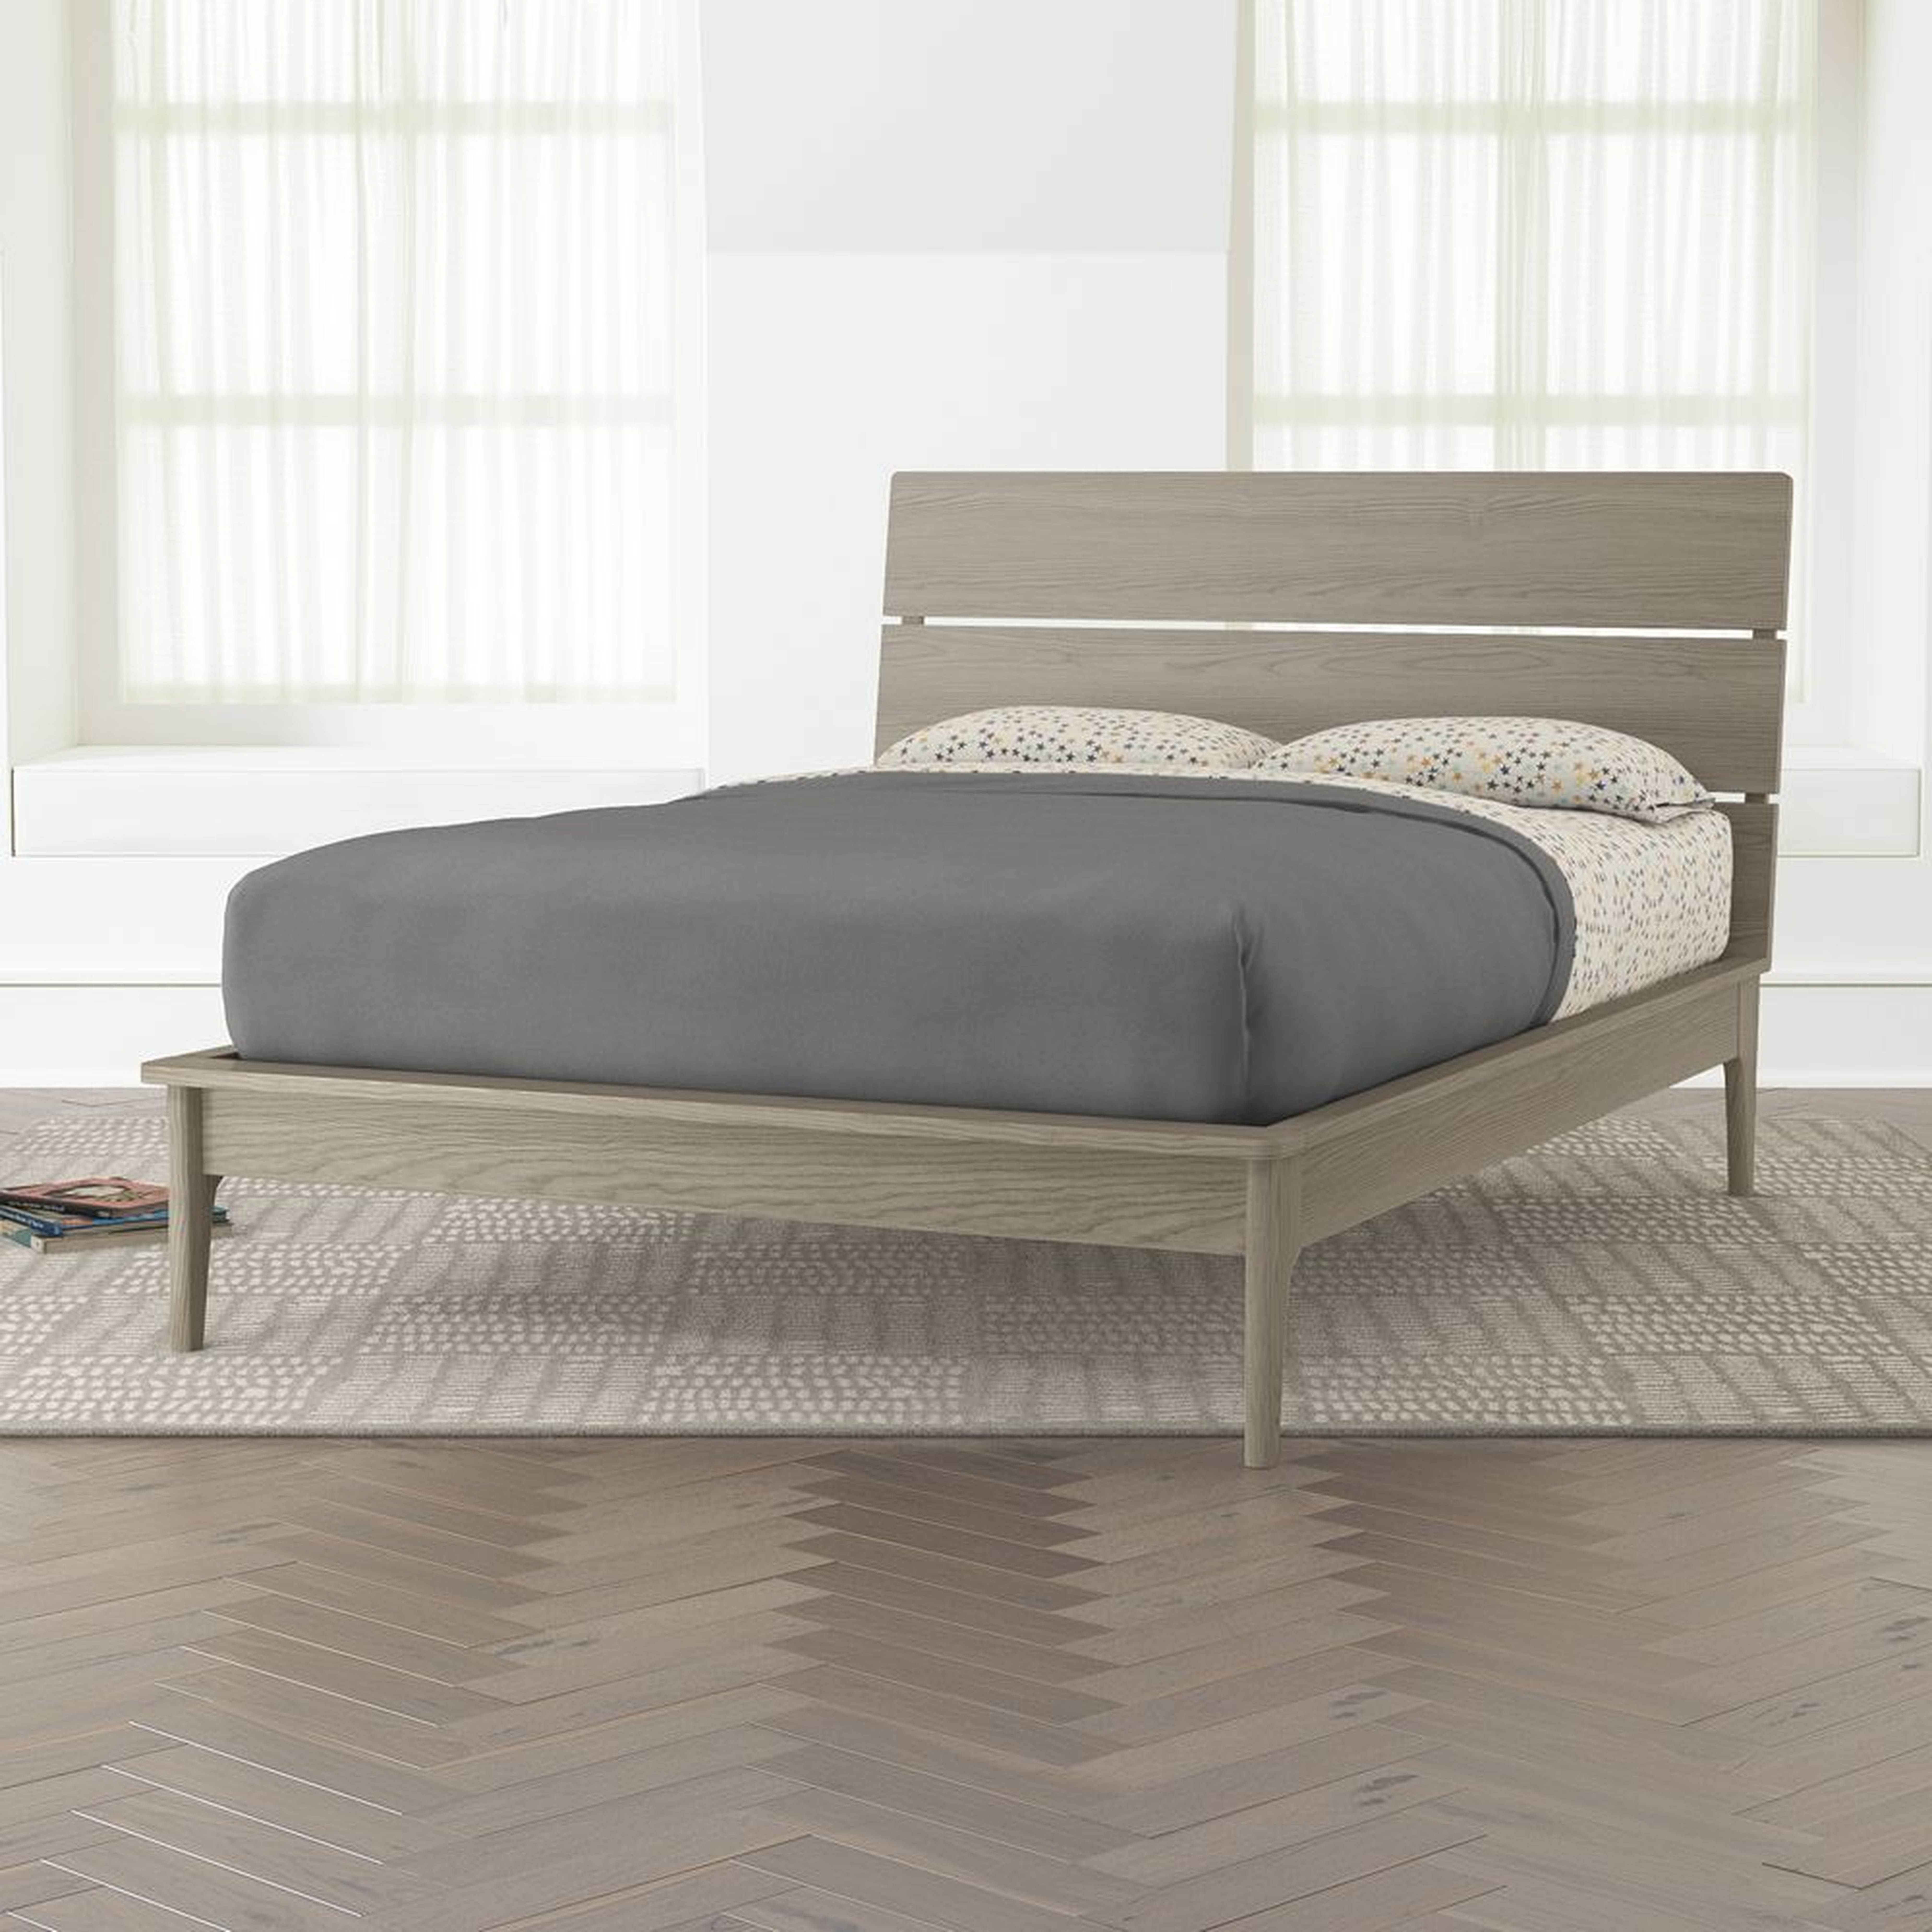 Wrightwood Grey Stain Full Bed - Crate and Barrel